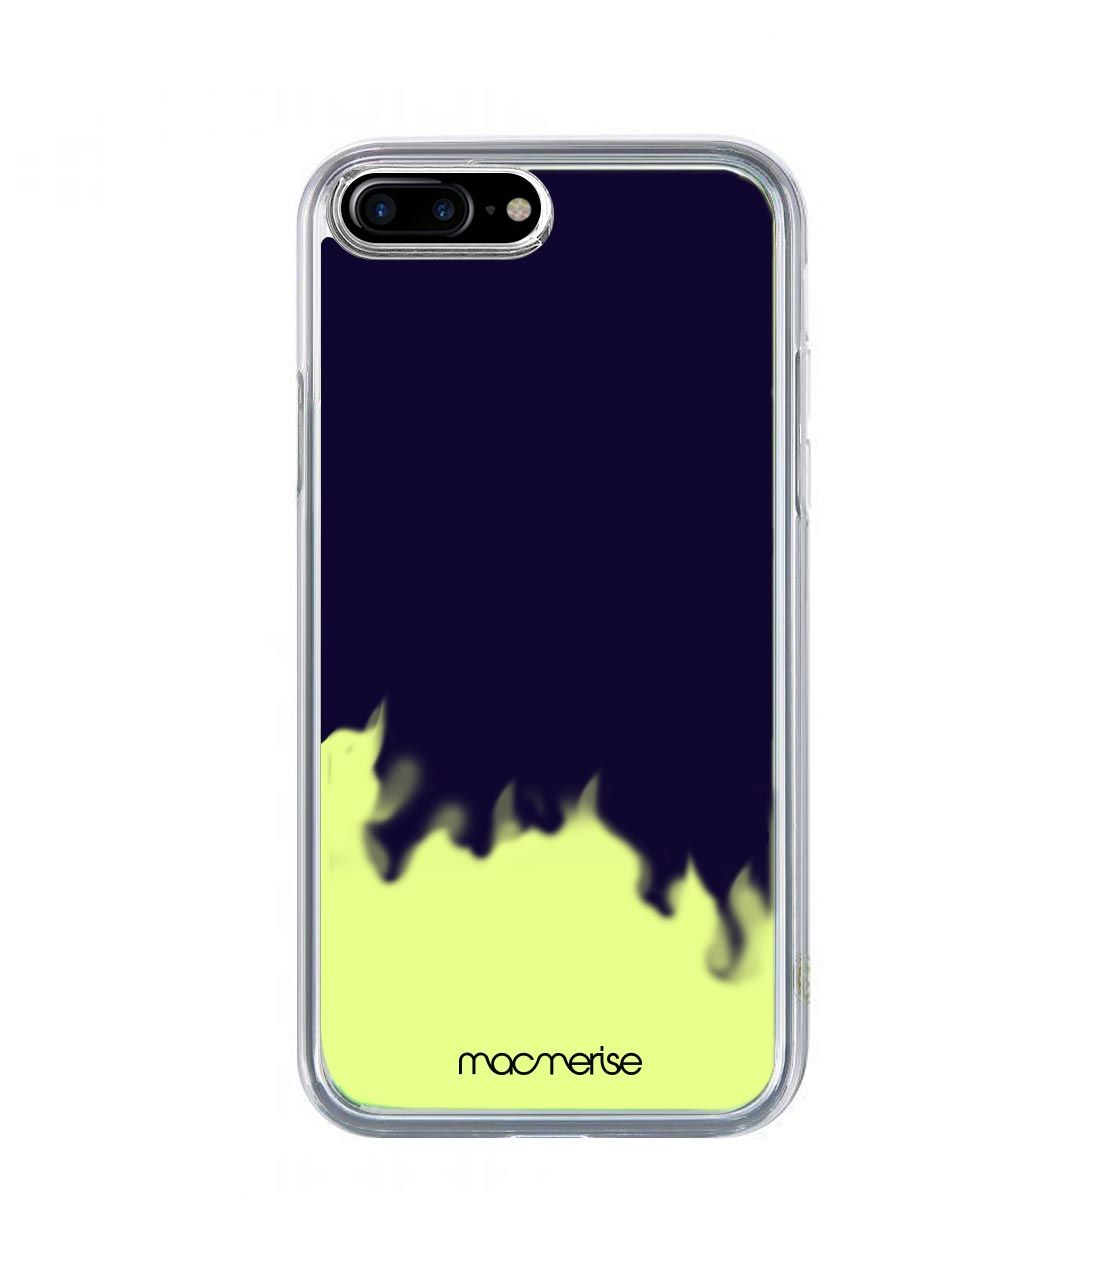 Neon Sand Blue - Neon Sand Phone Case for iPhone 7 Plus